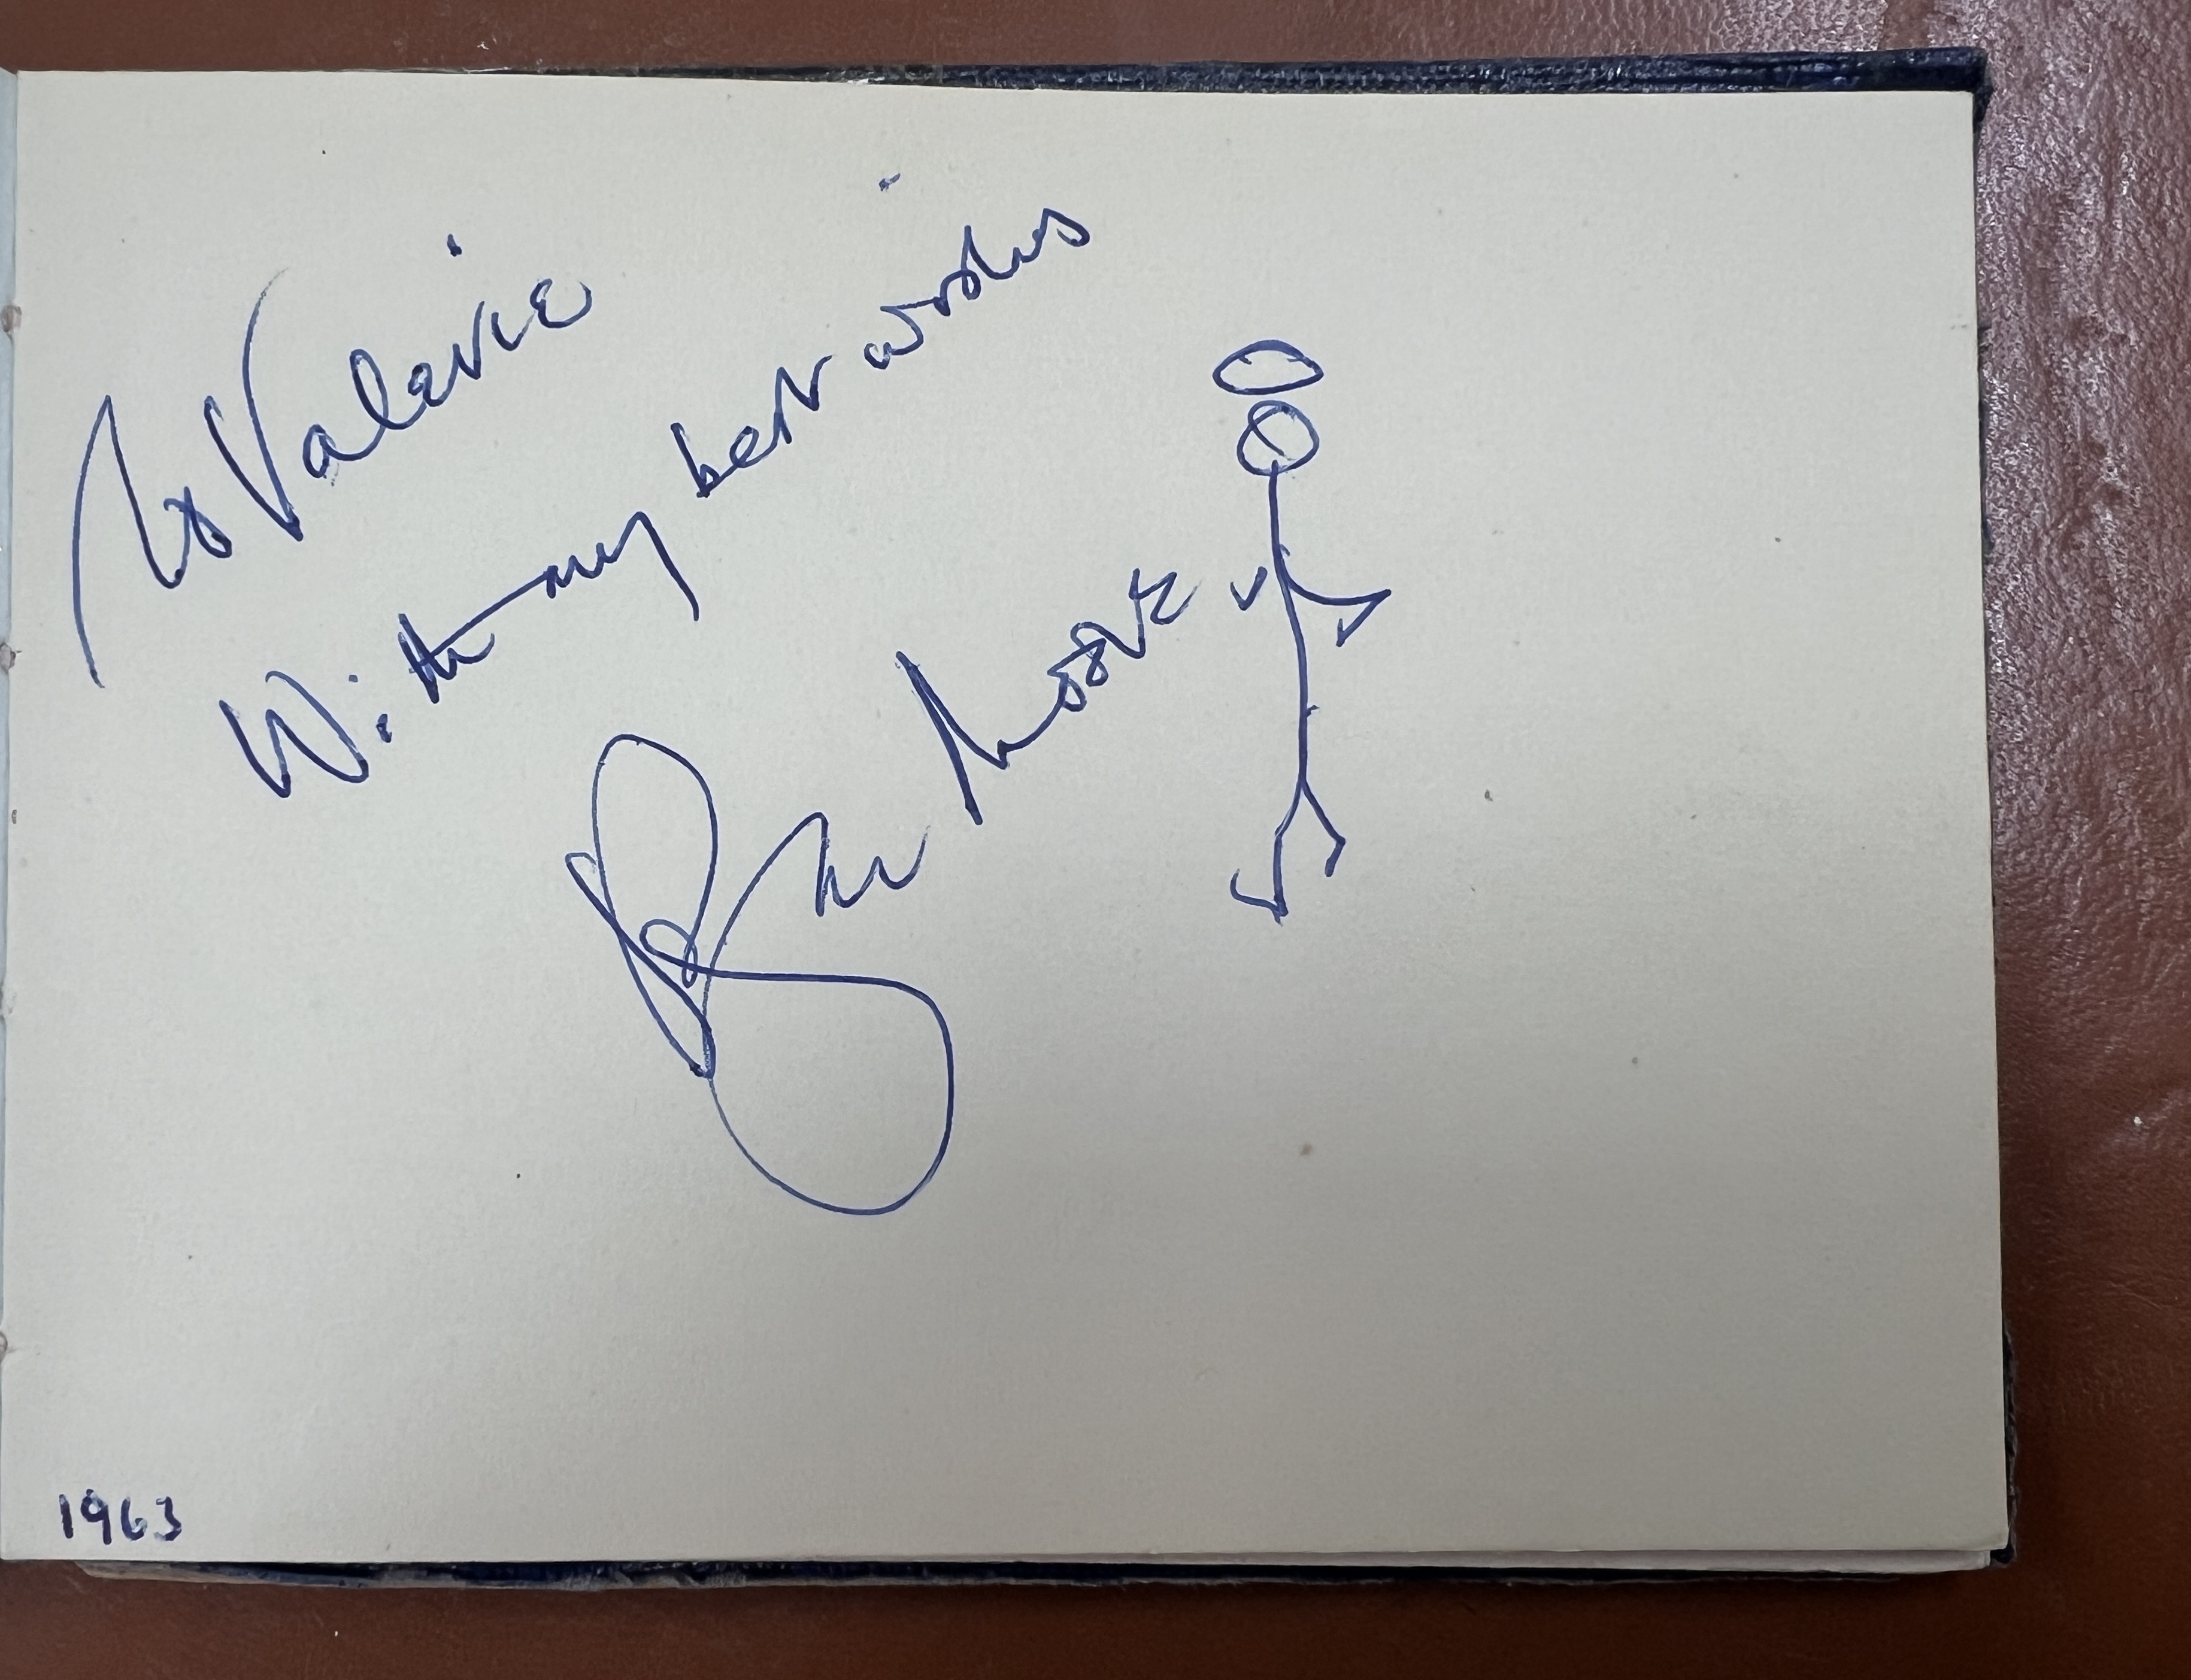 A 1960's autograph album containing autographs of various celebrities including Cliff Richard, - Image 22 of 37